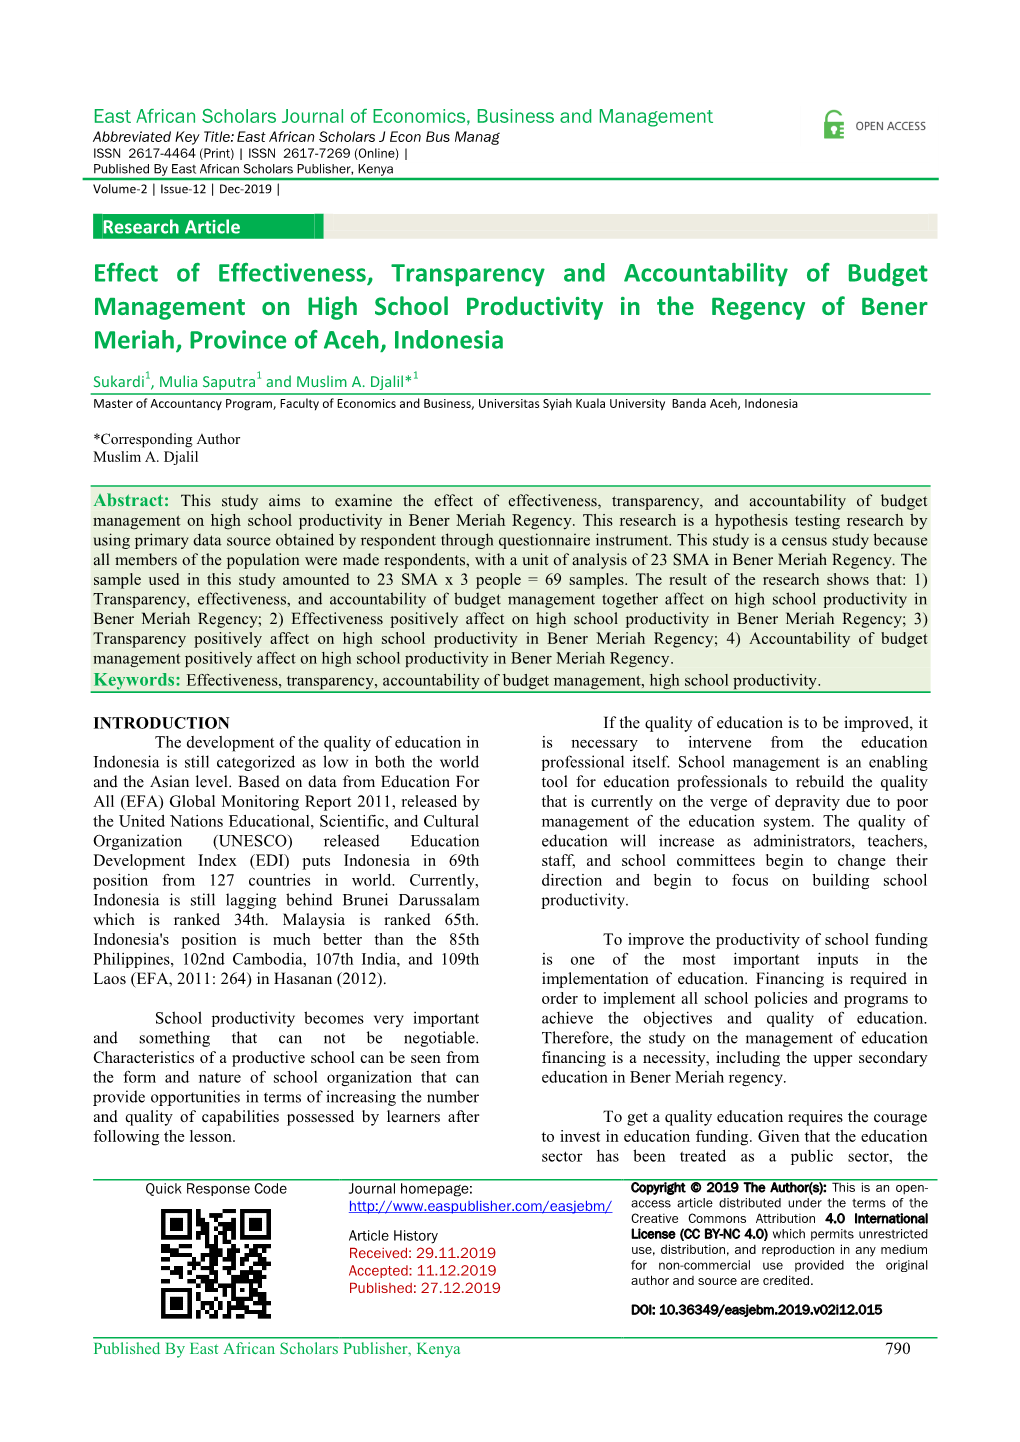 Effect of Effectiveness, Transparency and Accountability of Budget Management on High School Productivity in the Regency of Bener Meriah, Province of Aceh, Indonesia